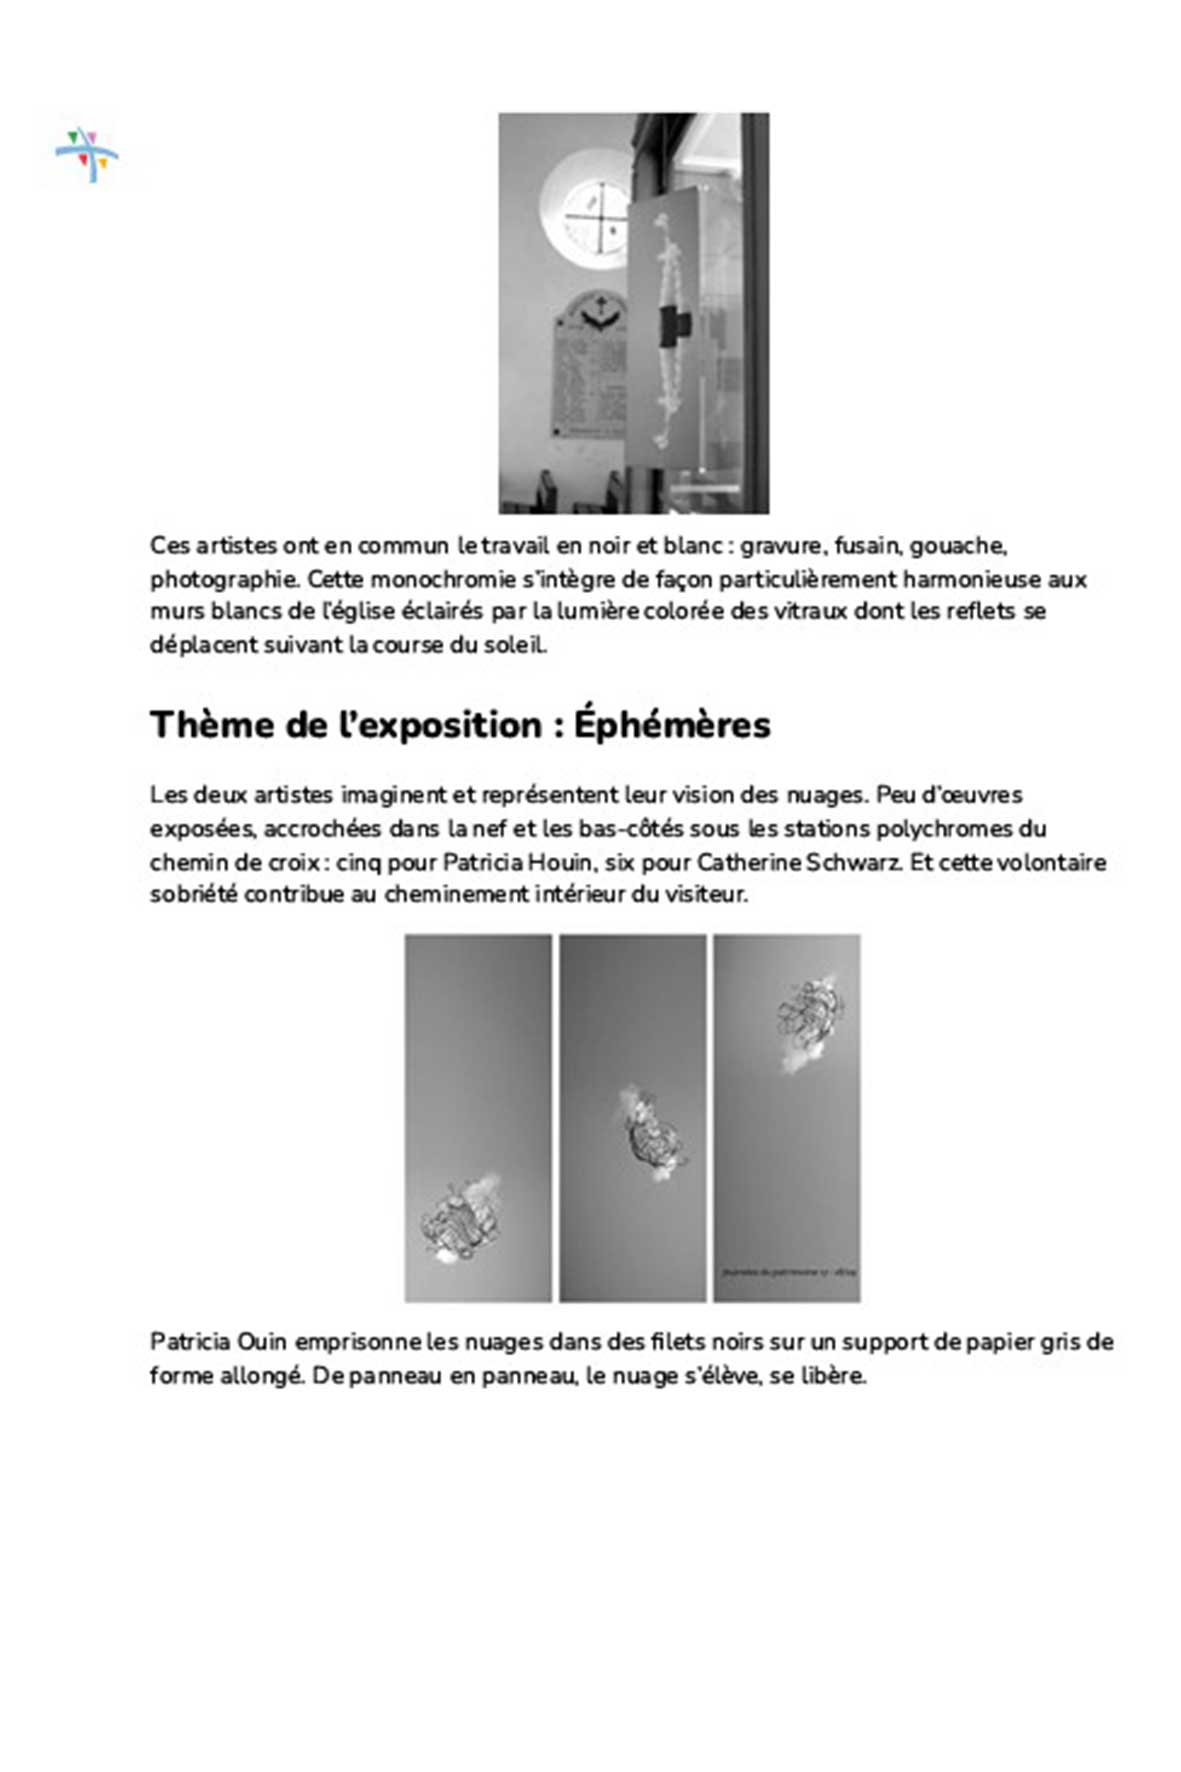 Expo Eglise Saint Victor Guyancourt Page 2